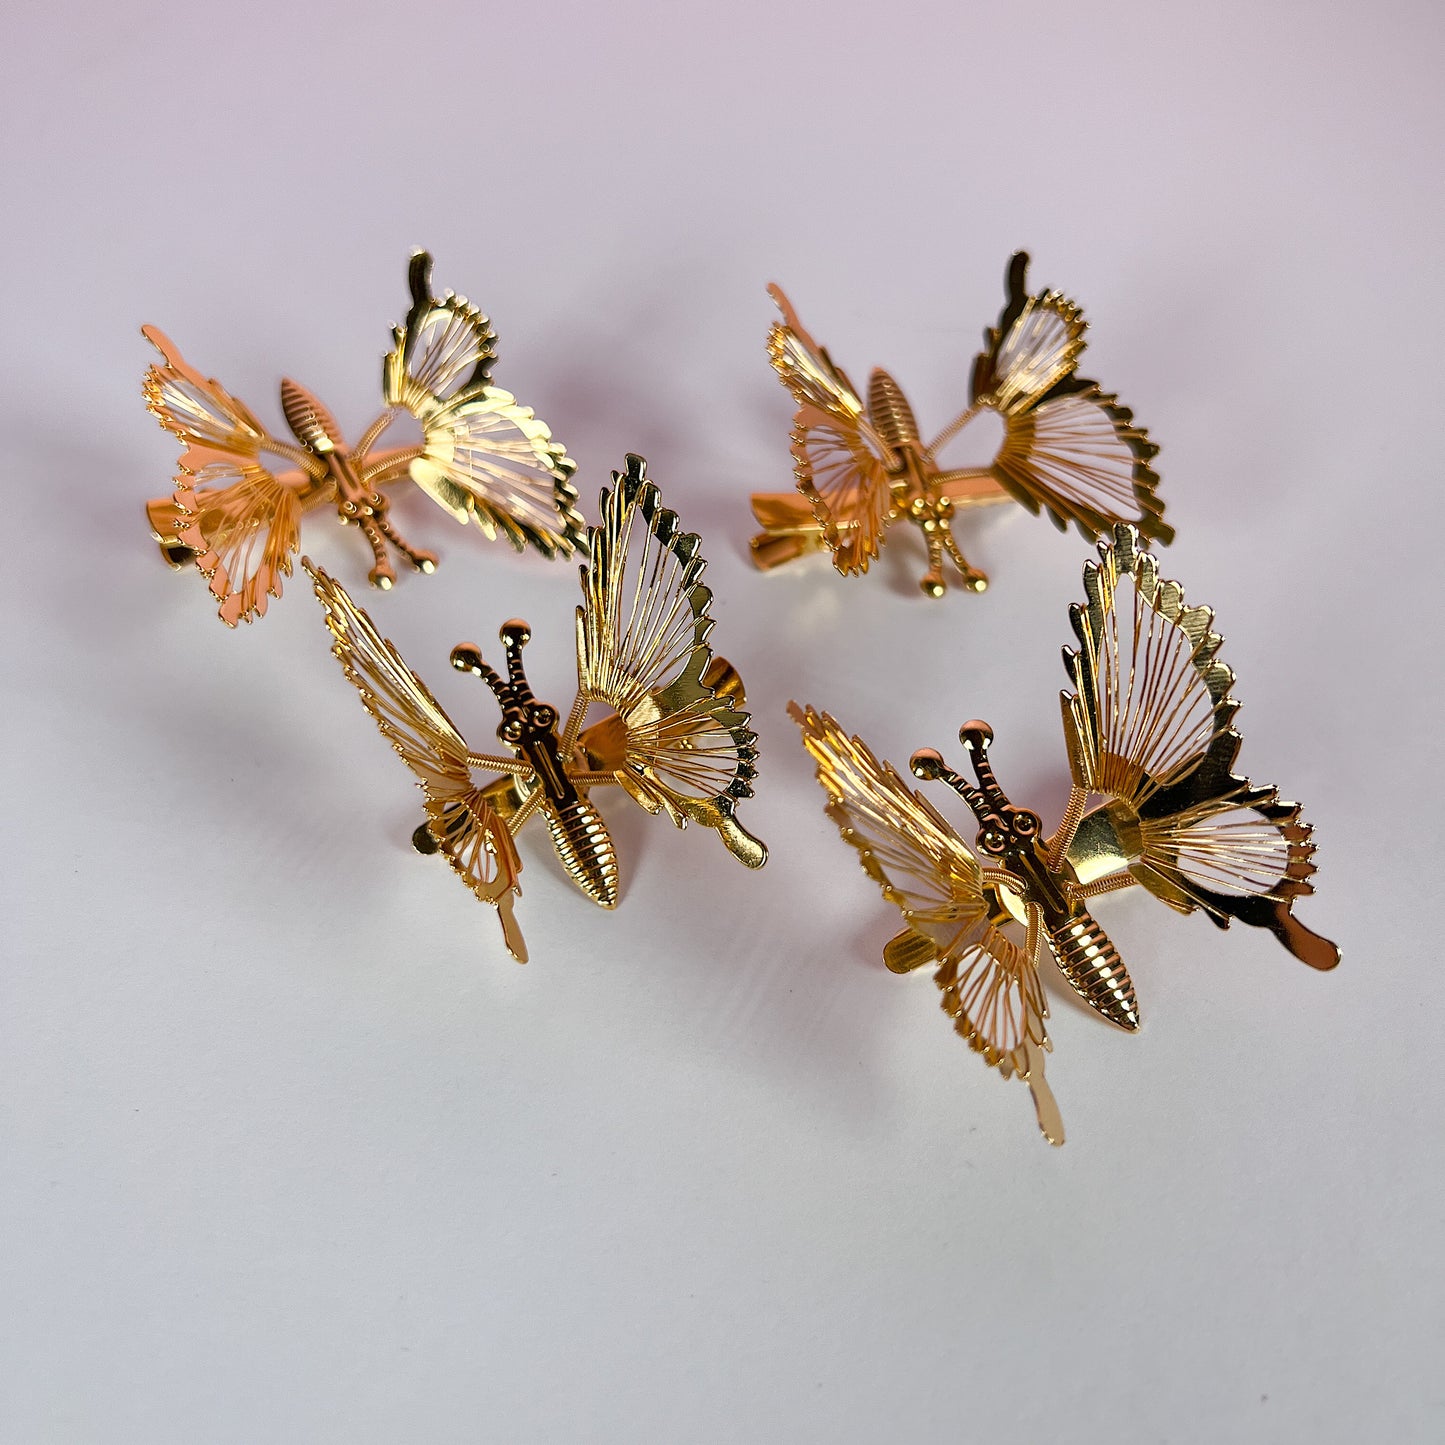 Gold Butterfly Alligator Clips With Moving Wings | 90s Hair accessories